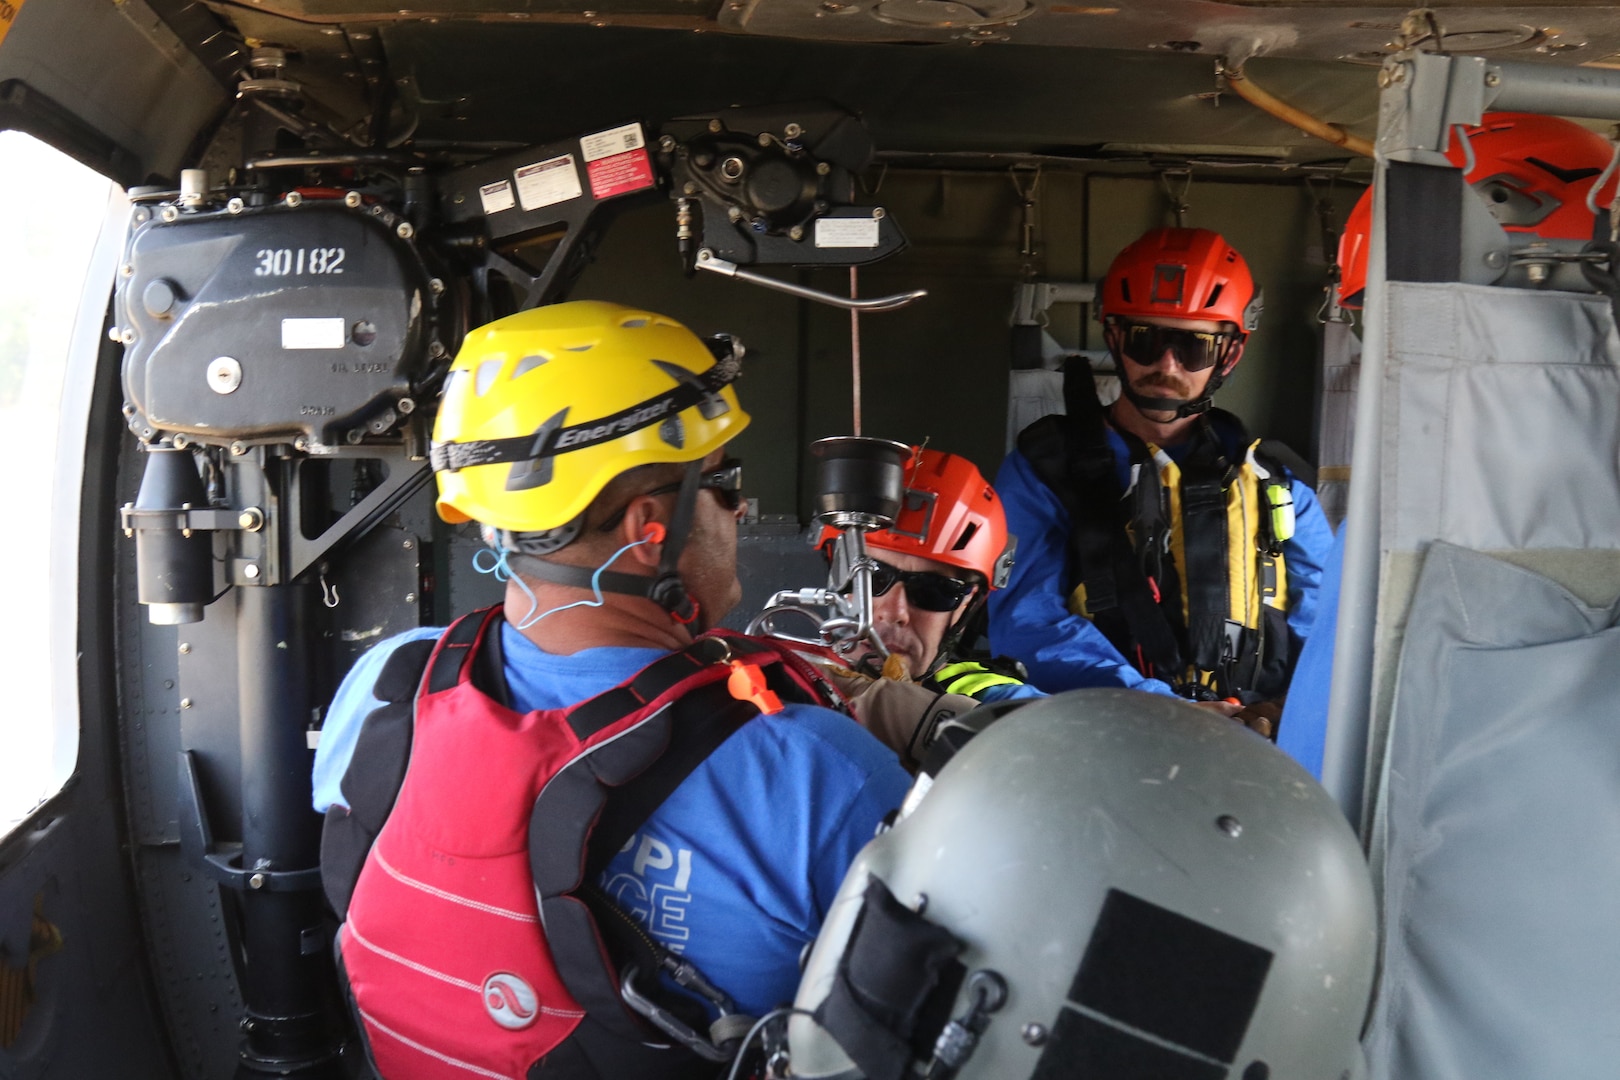 Members of the Mississippi Task Force Urban Search and Rescue team are harnessed to a hoist before being lowered from a helicopter during rooftop rescue training May 31, 2019 at Camp McCain, Mississippi. The joint training between the civilian task force and the military was part of Ardent Sentry 2019, an exercise training Mississippians to help Mississippians in times of crisis and be ready to assist in recovery efforts. (U.S. Army National Guard photo by PFC Austin Eldridge/RELEASED)